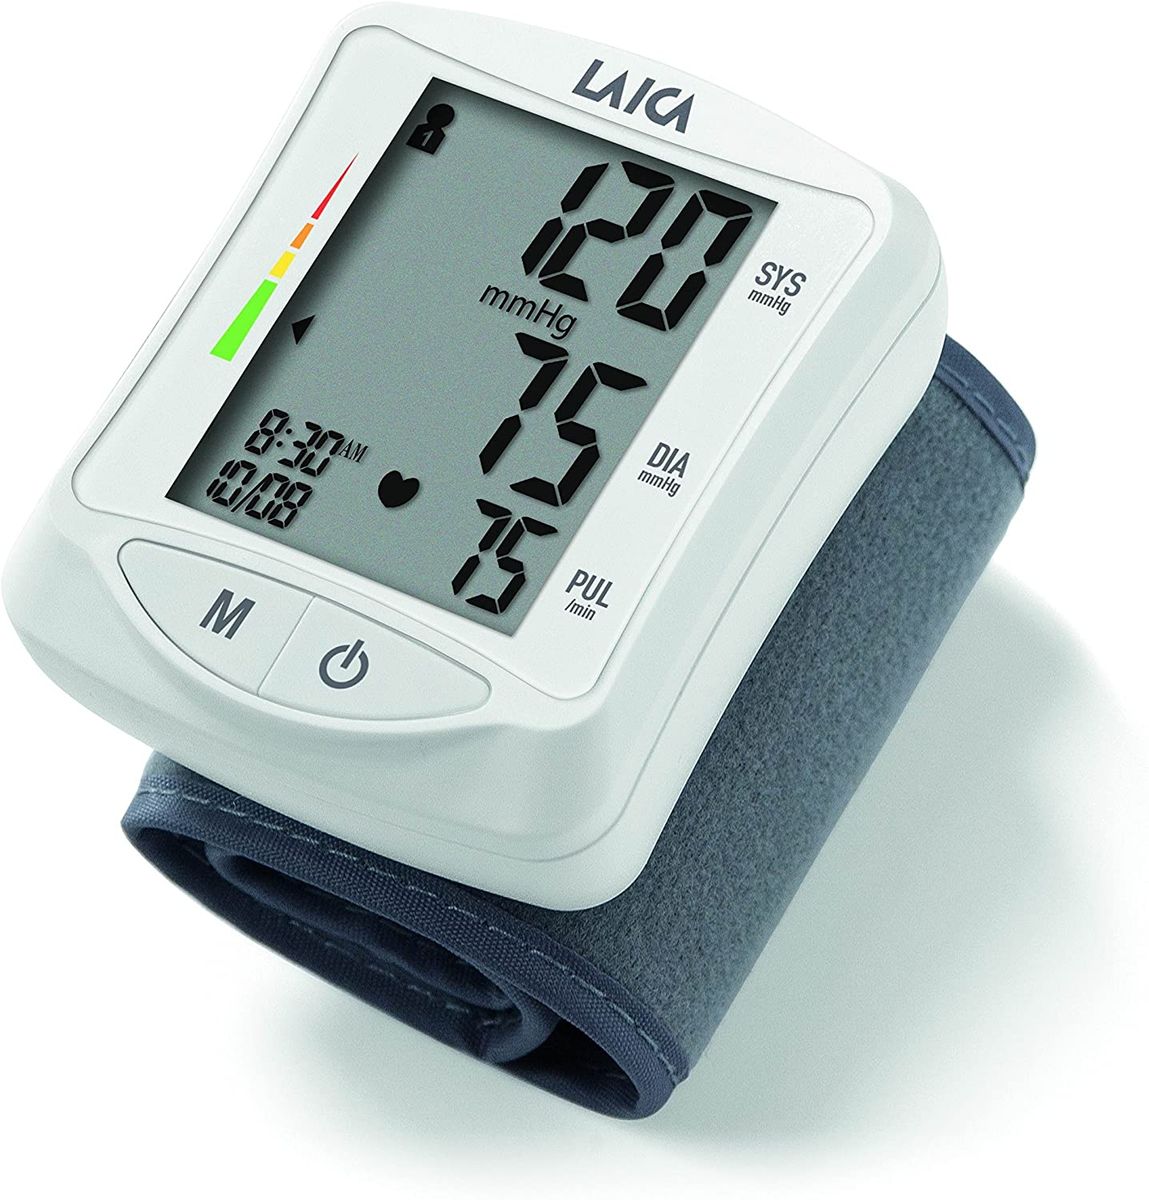 Laica Wrist Blood Pressure Monitor BM1006W Fully Automatic Blood Pressure and Pulse Measurement